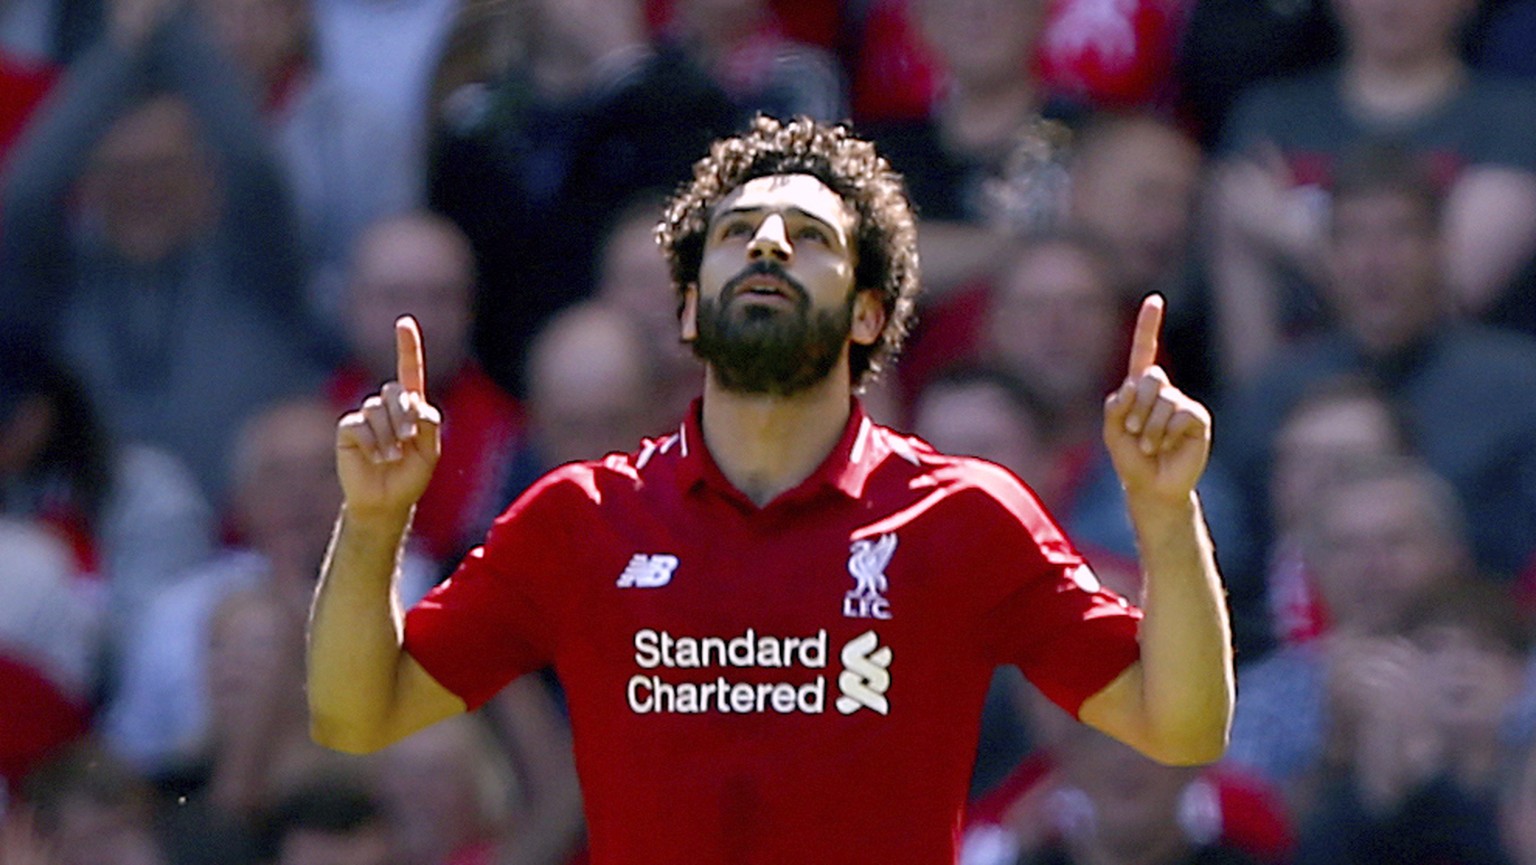 Liverpool&#039;s Mohamed Salah celebrates scoring his side&#039;s first goal of the game during their English Premier League soccer match against Brighton &amp; Hove Albion at Anfield, Liverpool. Engl ...